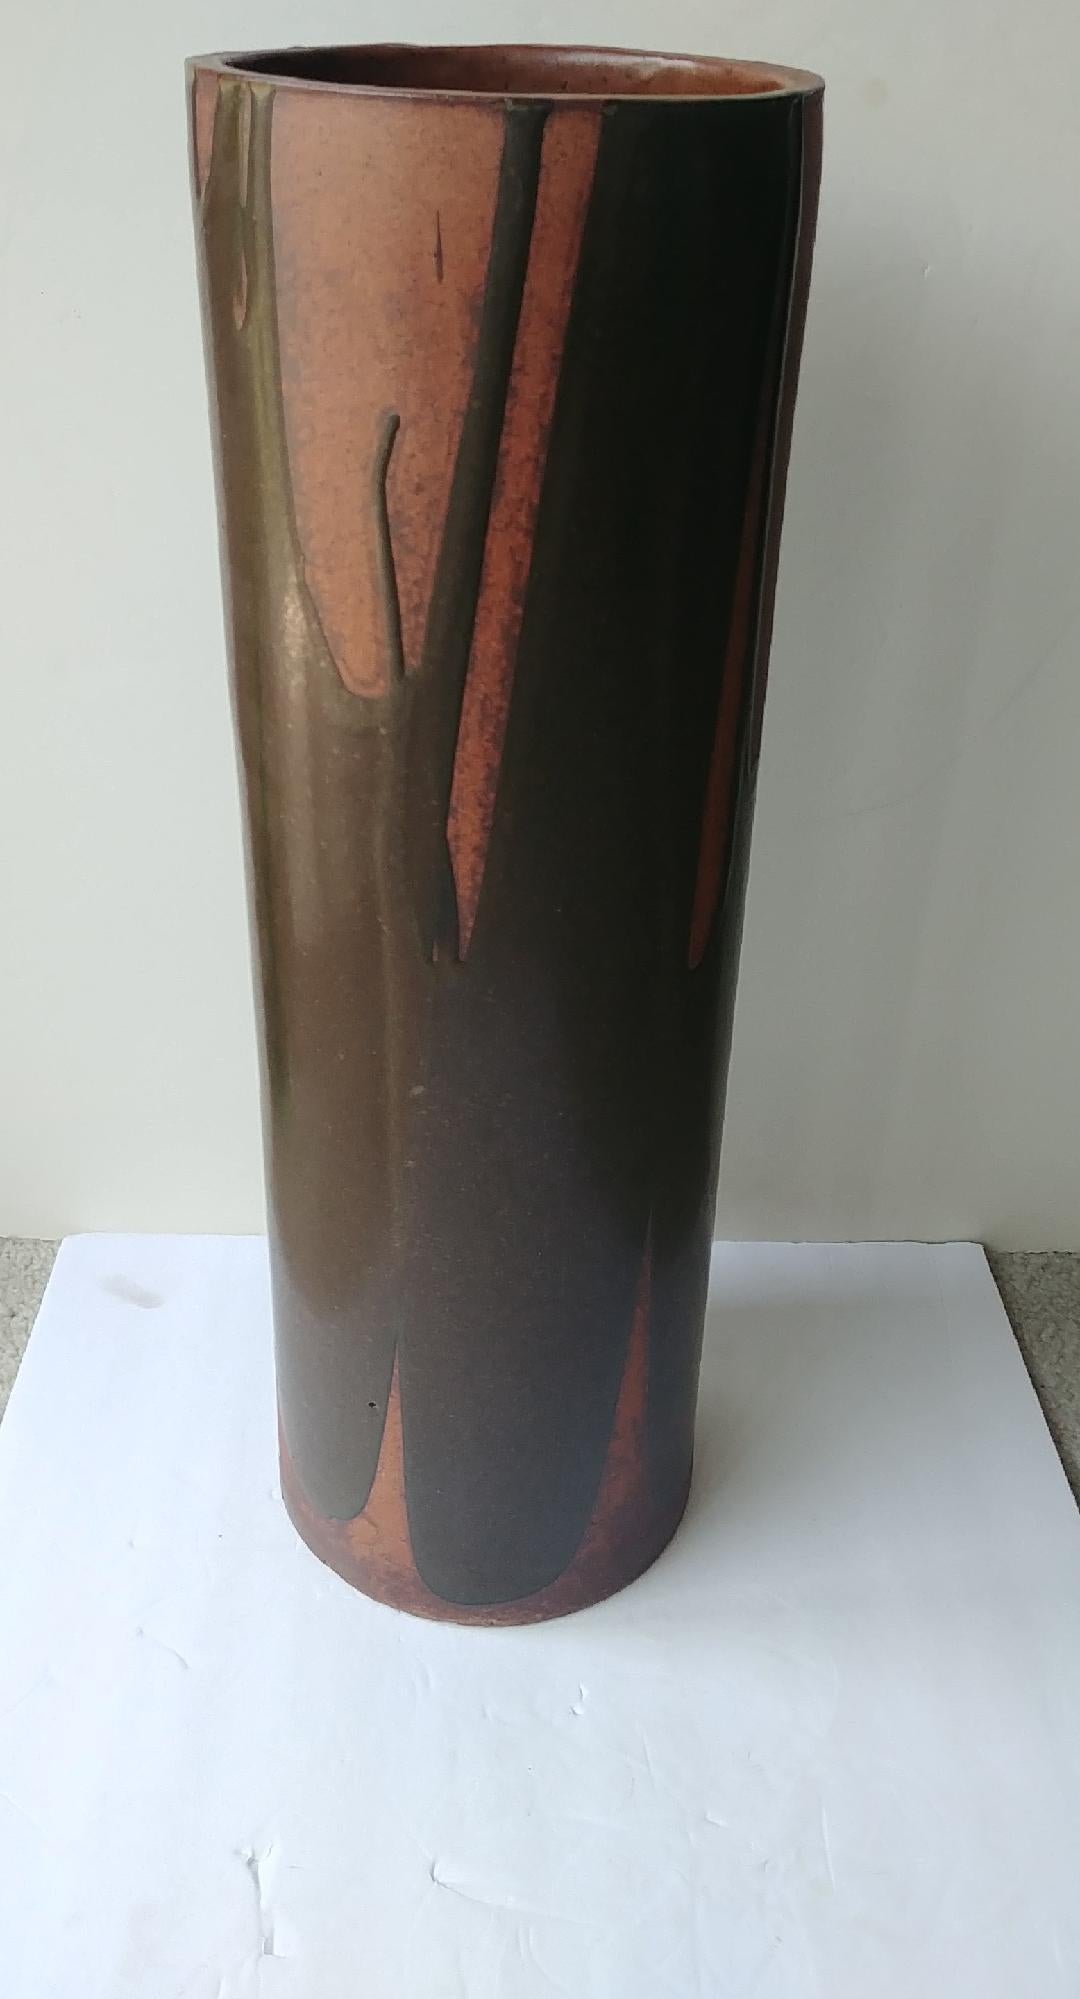 Great and rare David Cressey umbrella stand pro-artisan for Architectural Pottery. Could be use as large vase or tall planter, is a straight cylinder from top to bottom of 8 inches diameter.